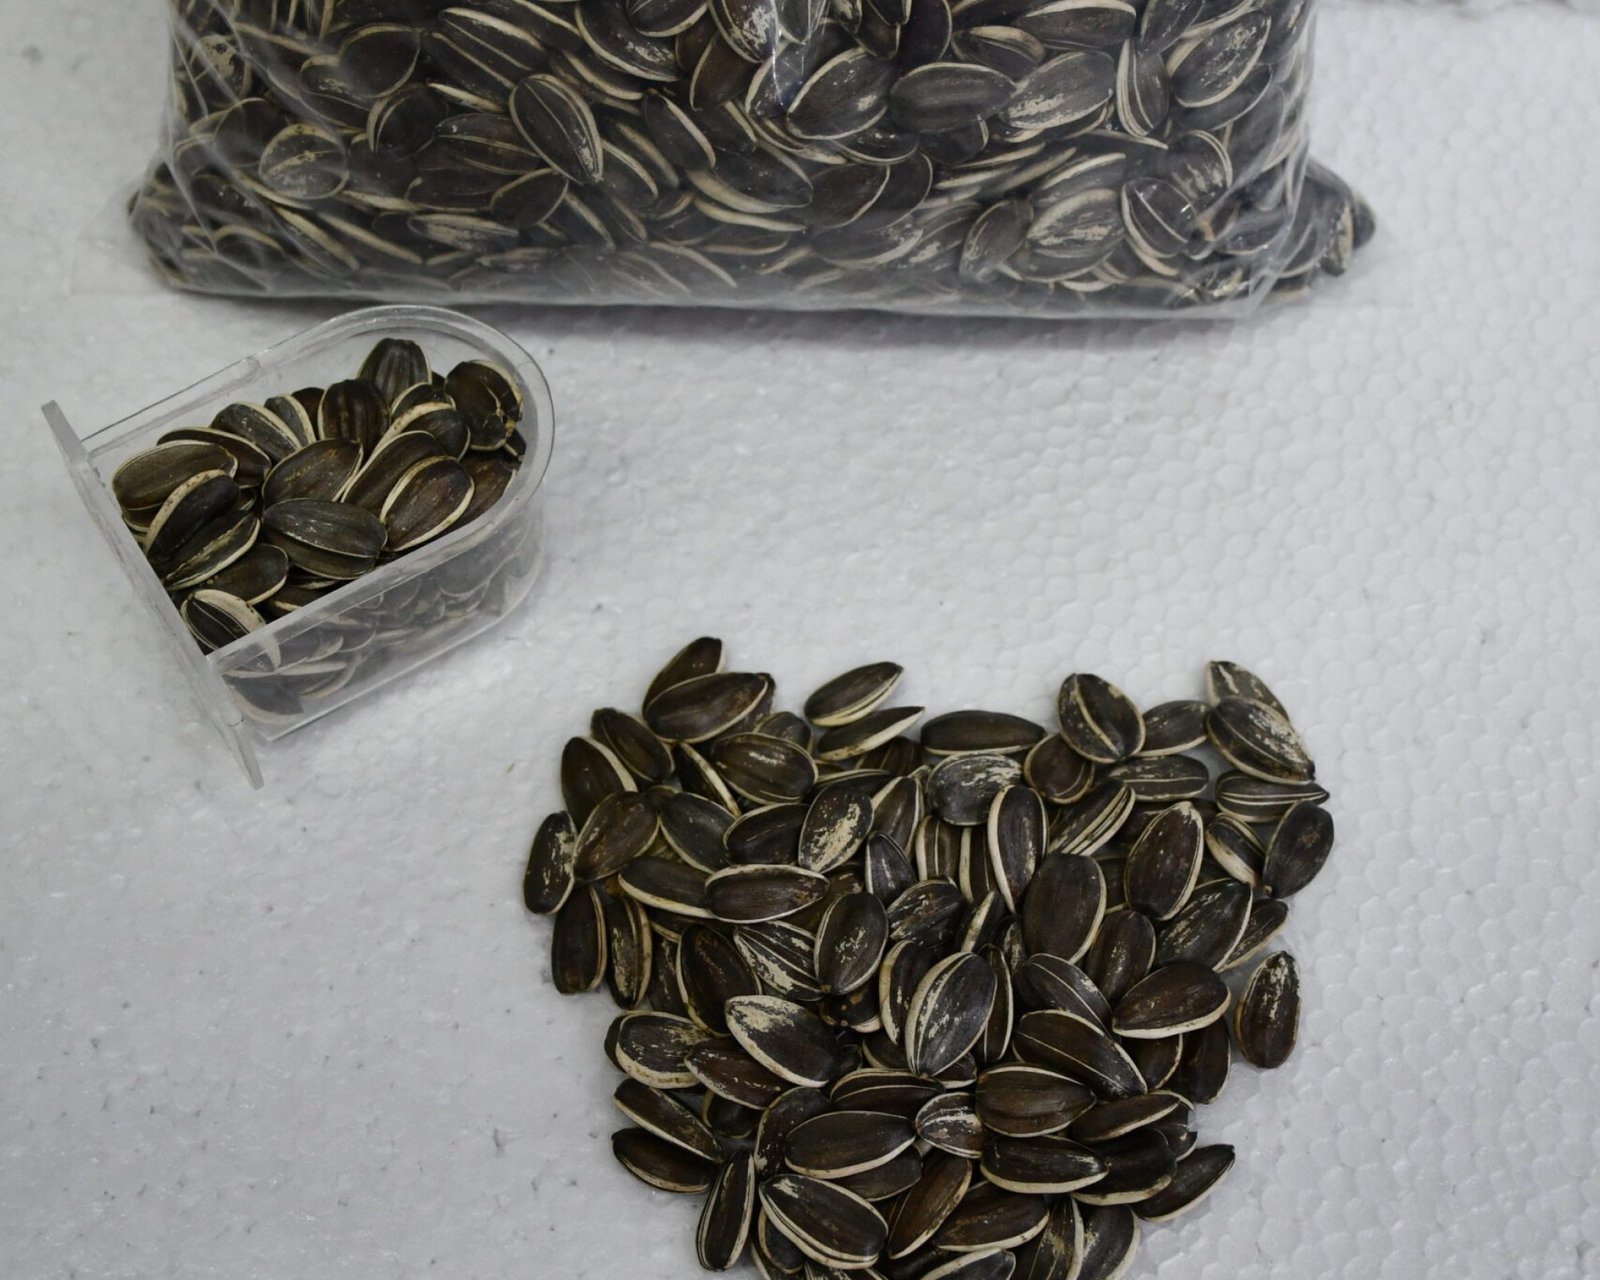 Big Sunflower Seed (For Lovebirds, Parrots, Conures, Cockatoos, Macaws)